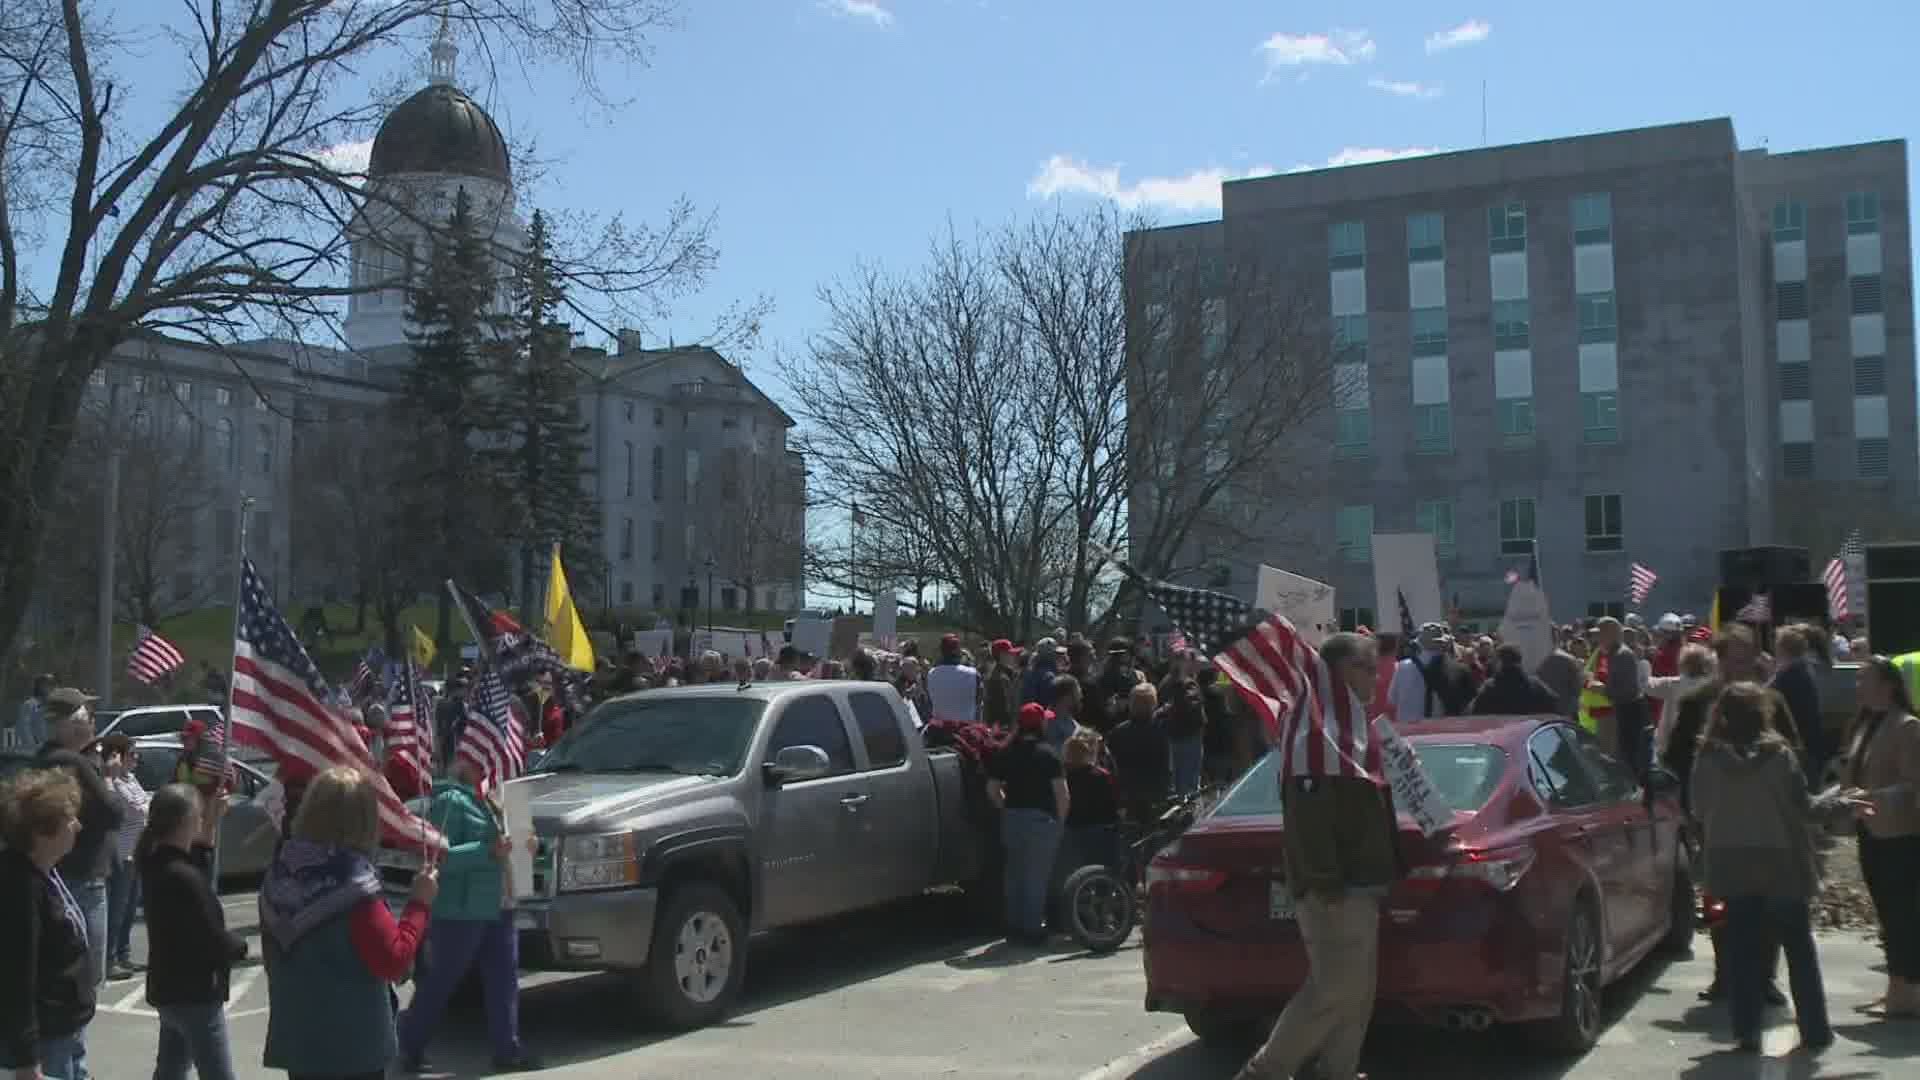 Protesters gathered in Augusta, urging Governor Mills to end the stay-at-home order and re-open Maine's economy.